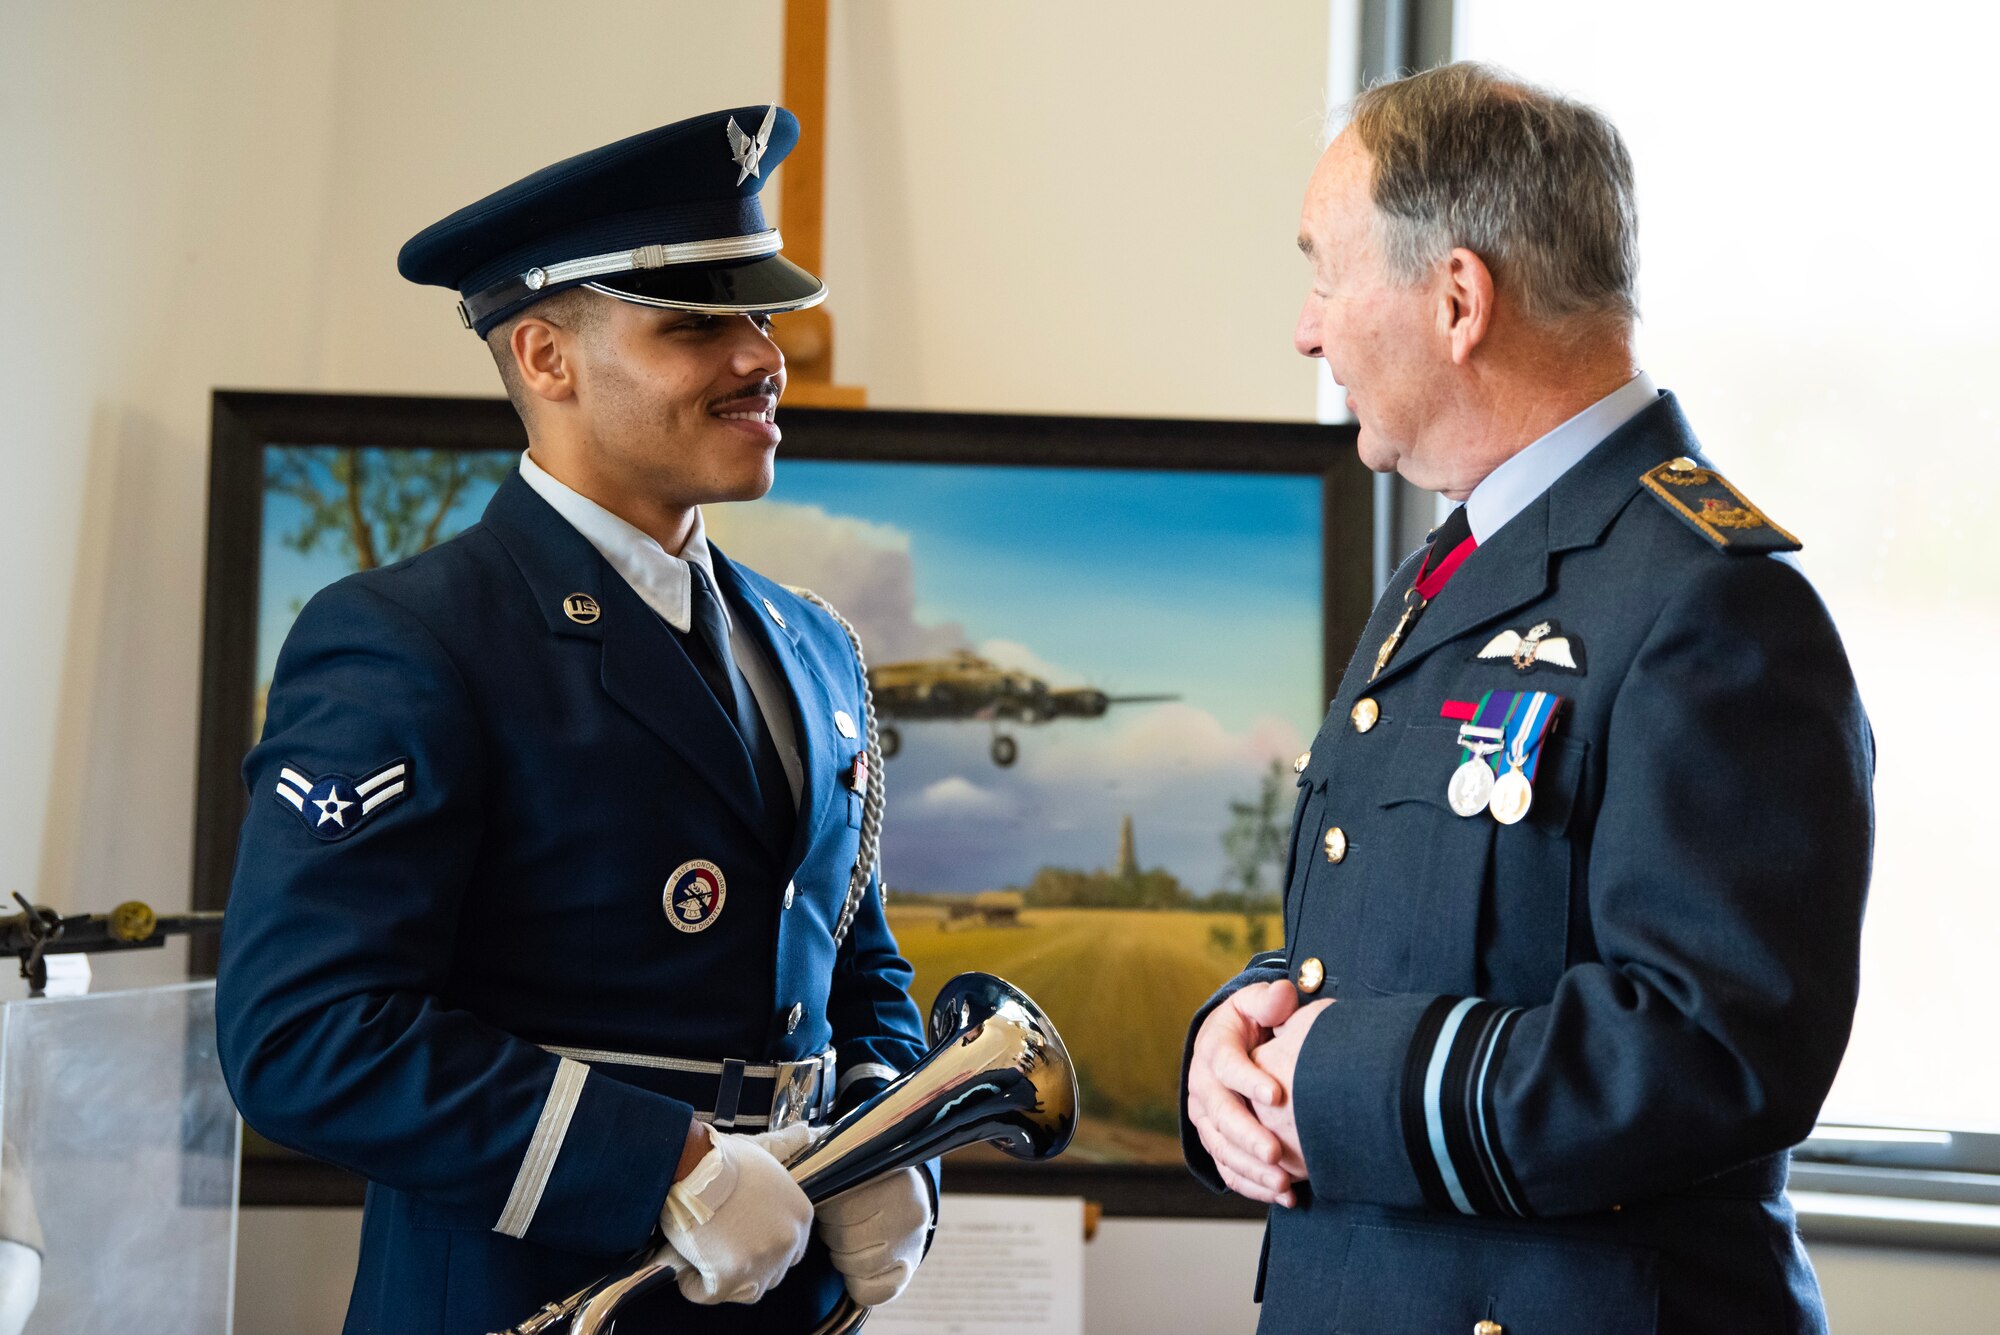 An Airman from the 501st Combat Support Wing Honor Guard speaks with Air Vice-Marshal Andrew White CB DL, after a Ceremony of Remembrance at Stanwick Lakes, England, Feb. 22, 2024. U.S. and U.K. leaders gathered to honor 17 Airmen who died in a midair collision on Feb. 22, 1944, involving B-17 Flying Fortresses from the 303rd Bombardment Group at RAF Molesworth and the 384th Bombardment Group at RAF Grafton Underwood. The Airmen were part of Operation Argument, or "The Big Week," targeting enemy industrial sites and aircraft facilities in Central Europe to secure Allied air superiority for the upcoming landings in France in June 1944. (U.S. Air Force photo by Staff Sgt. Jennifer Zima)